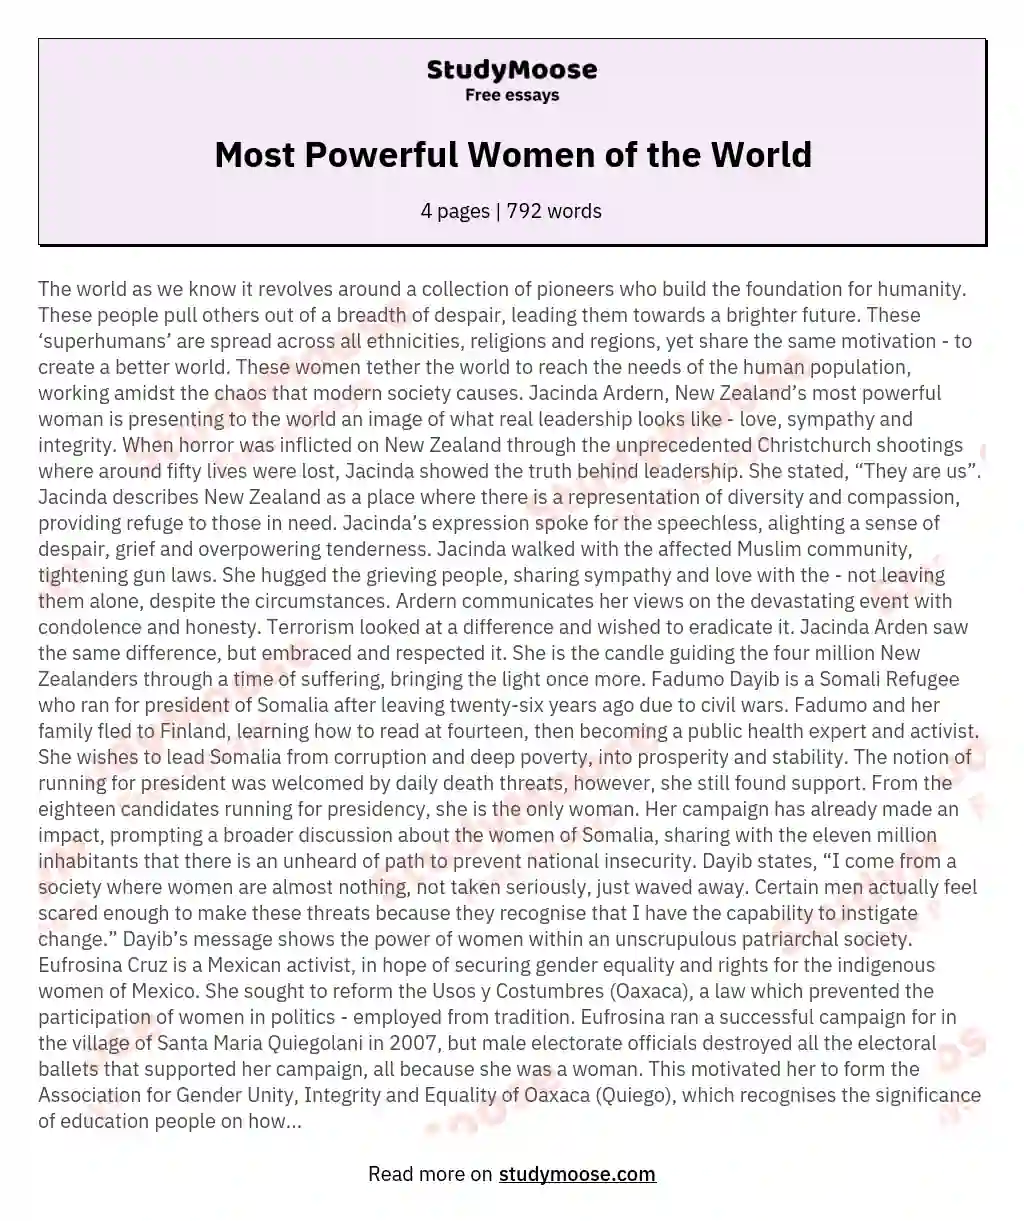 Most Powerful Women of the World essay